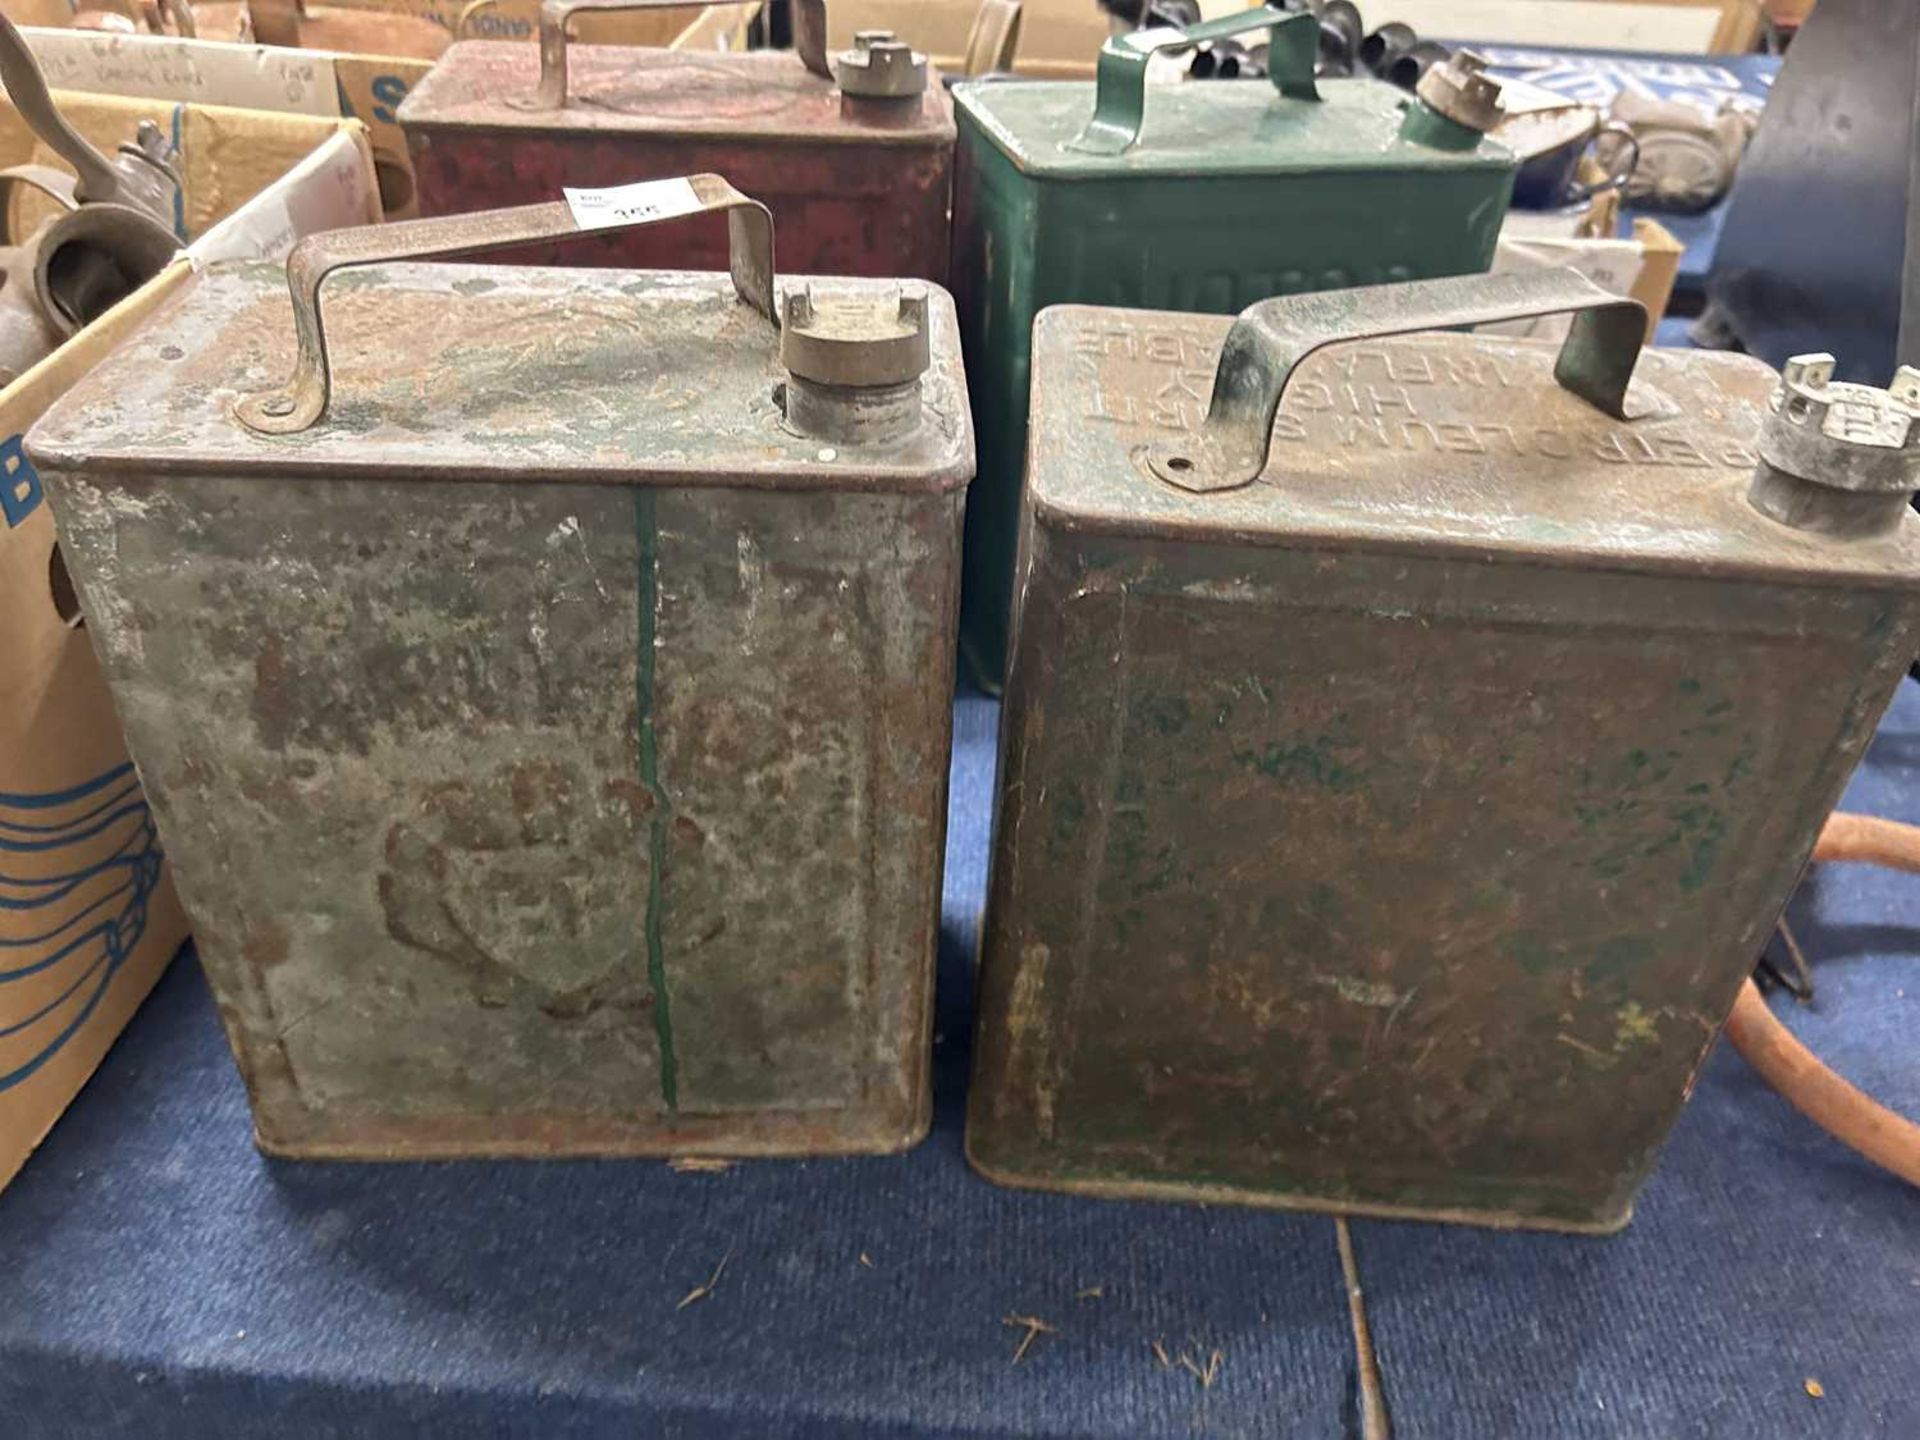 Two vintage petrol cans, one marked 'Shellmex', the other plain